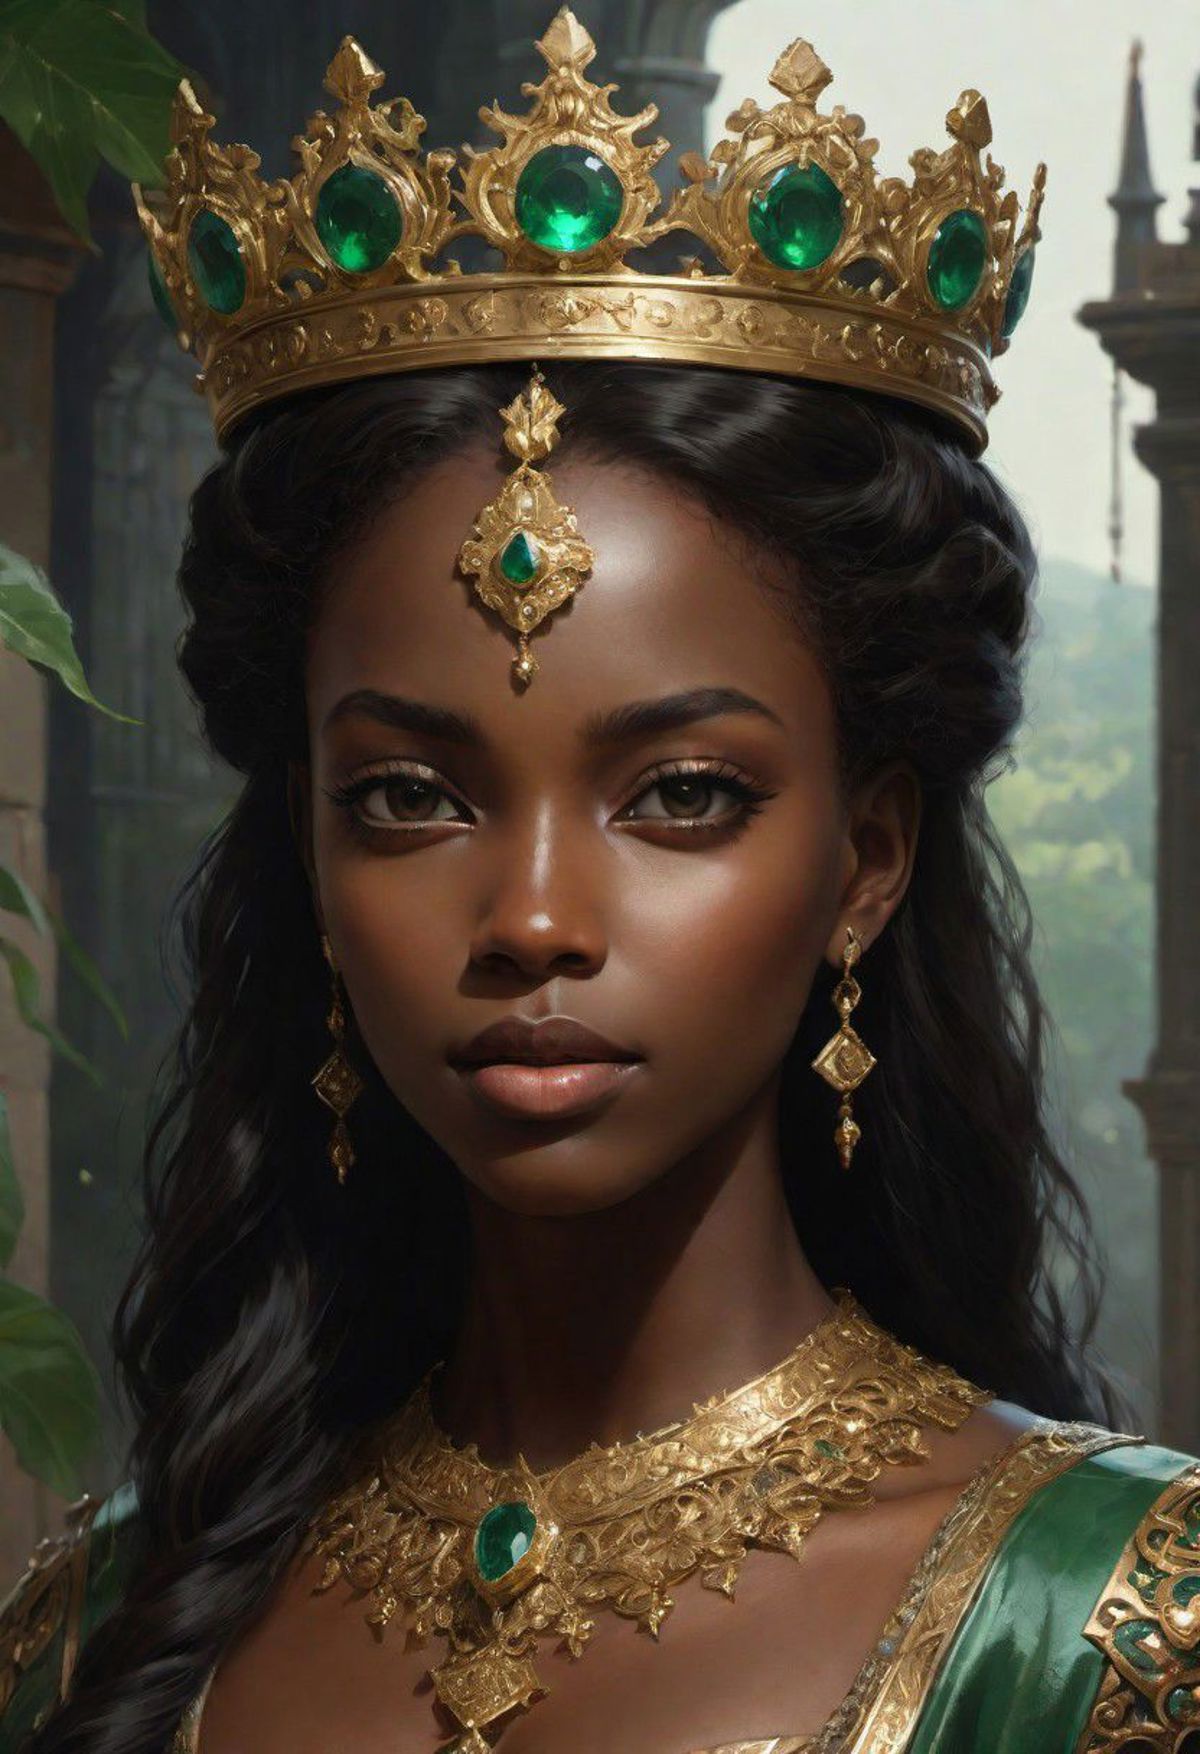 A black woman wearing a gold crown and earrings.